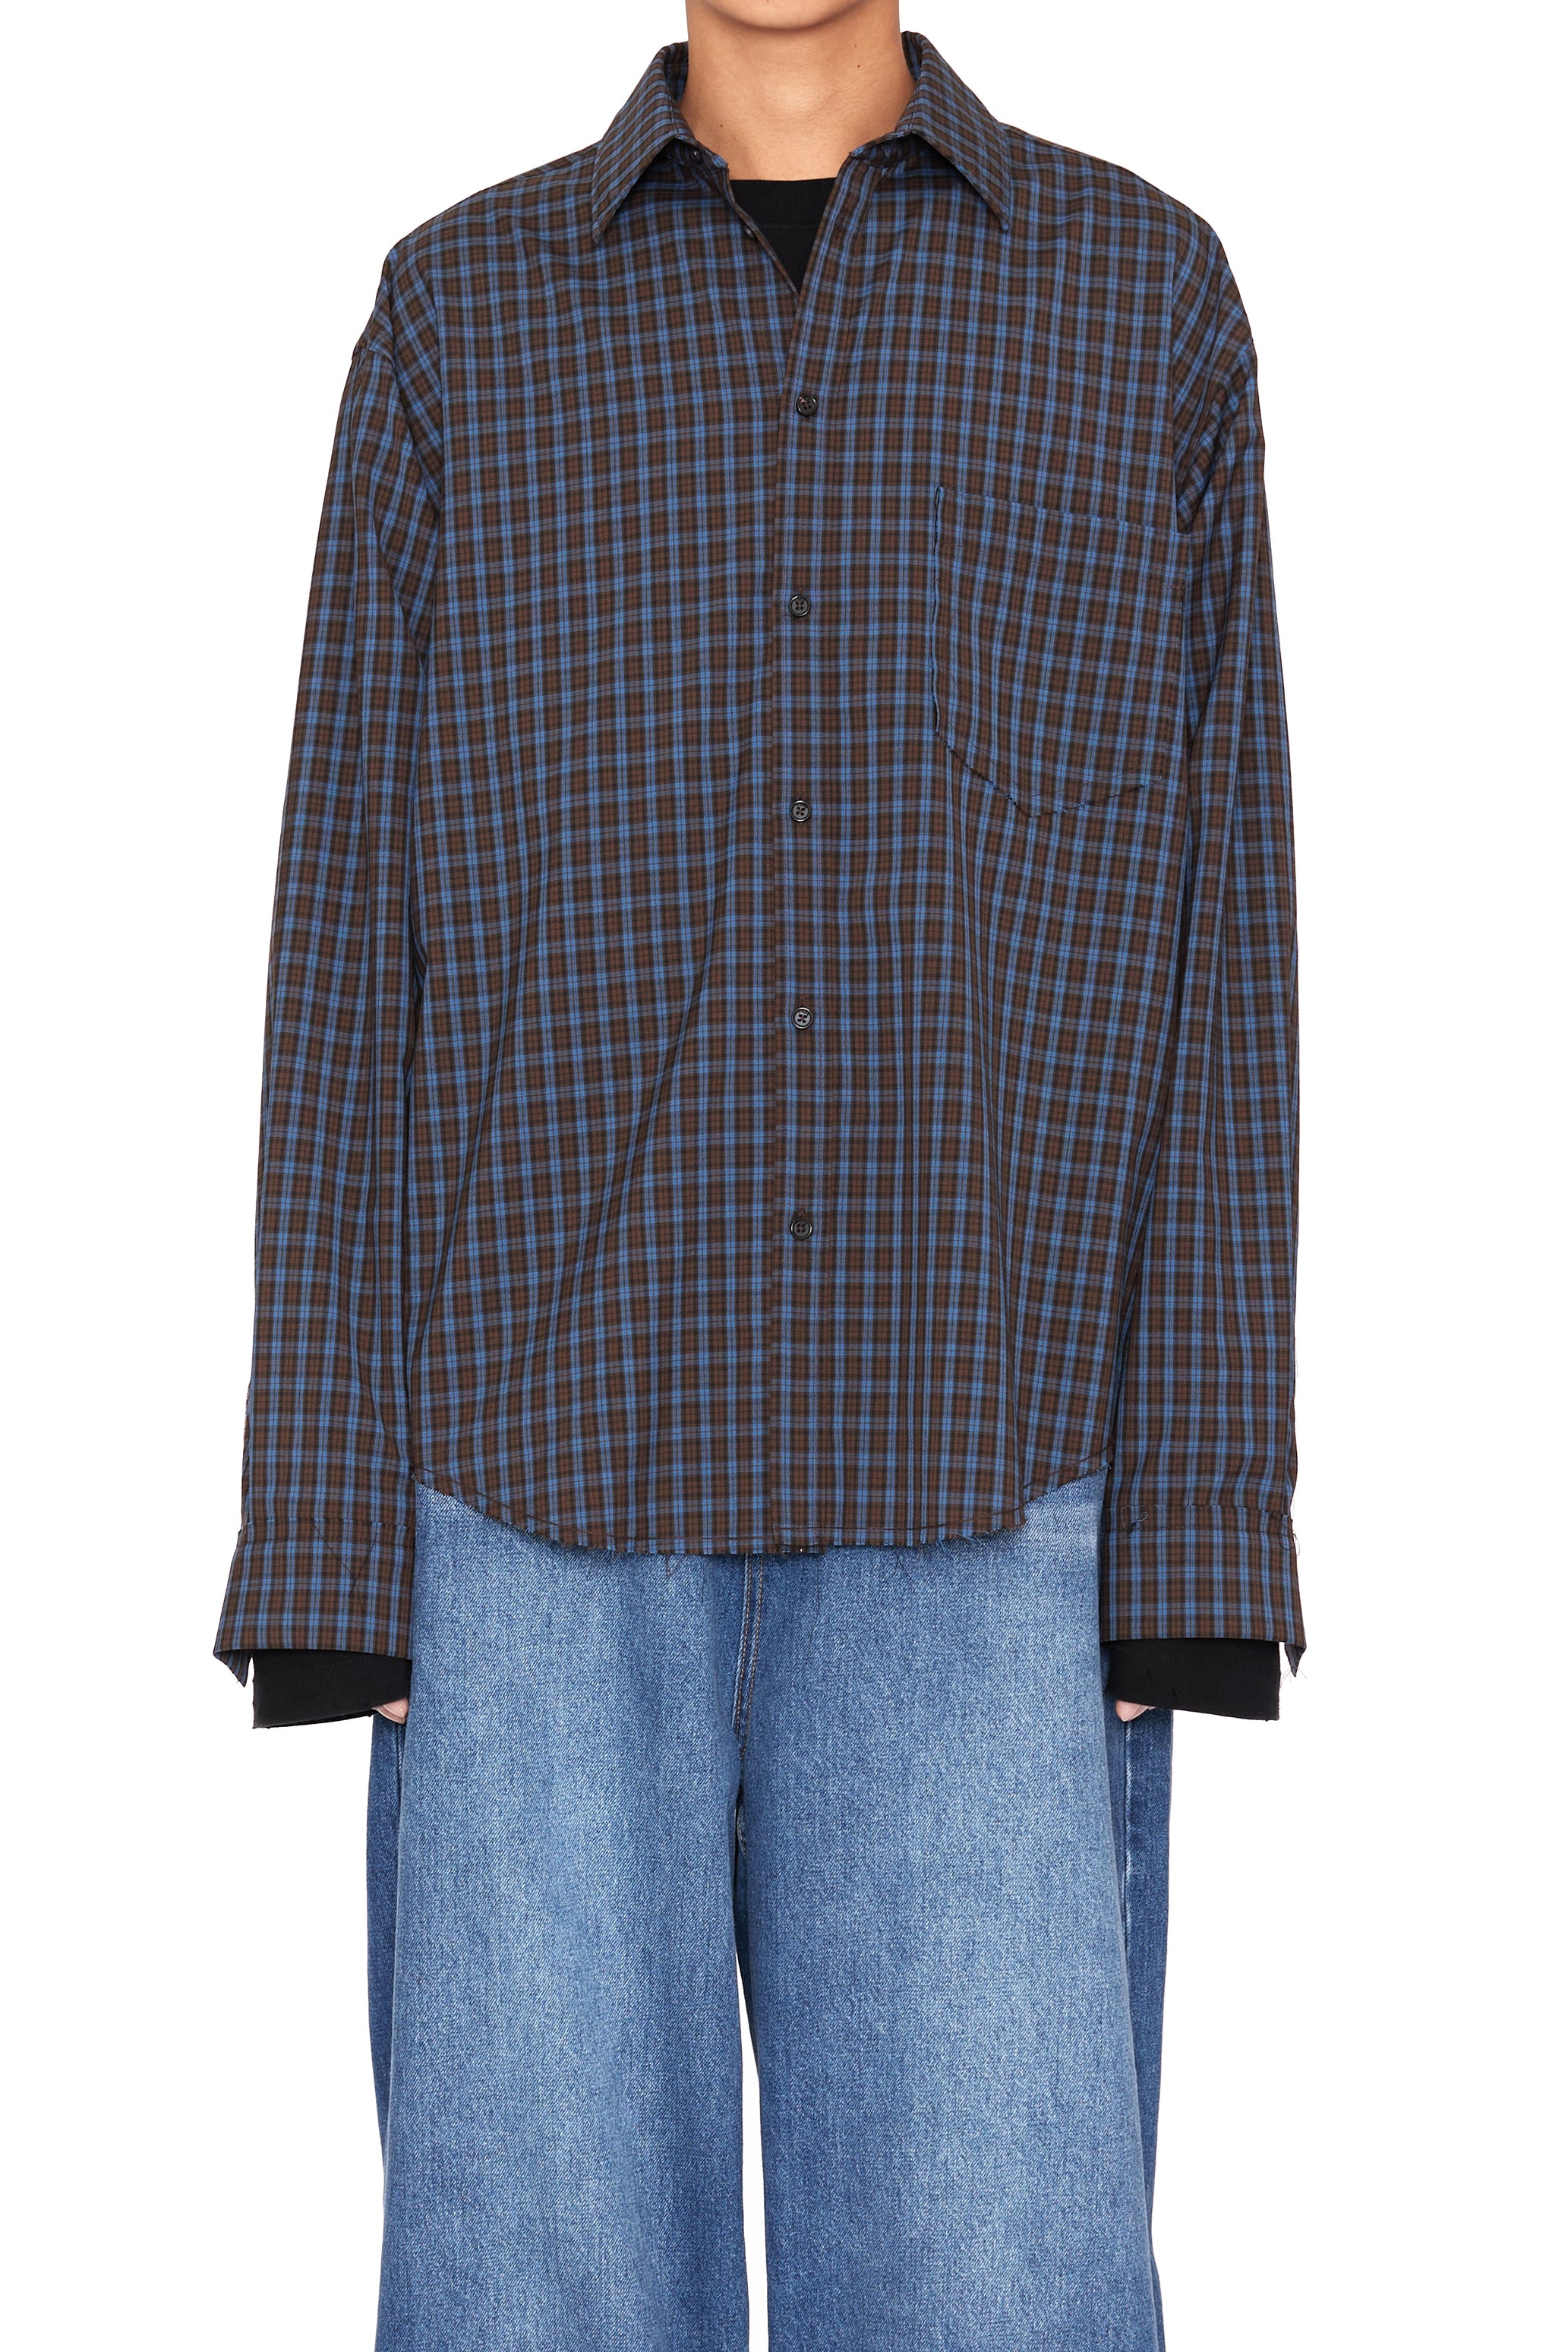 BROWN CHECK WOOL POLY RAW EDGES SHIFTED SHIRT